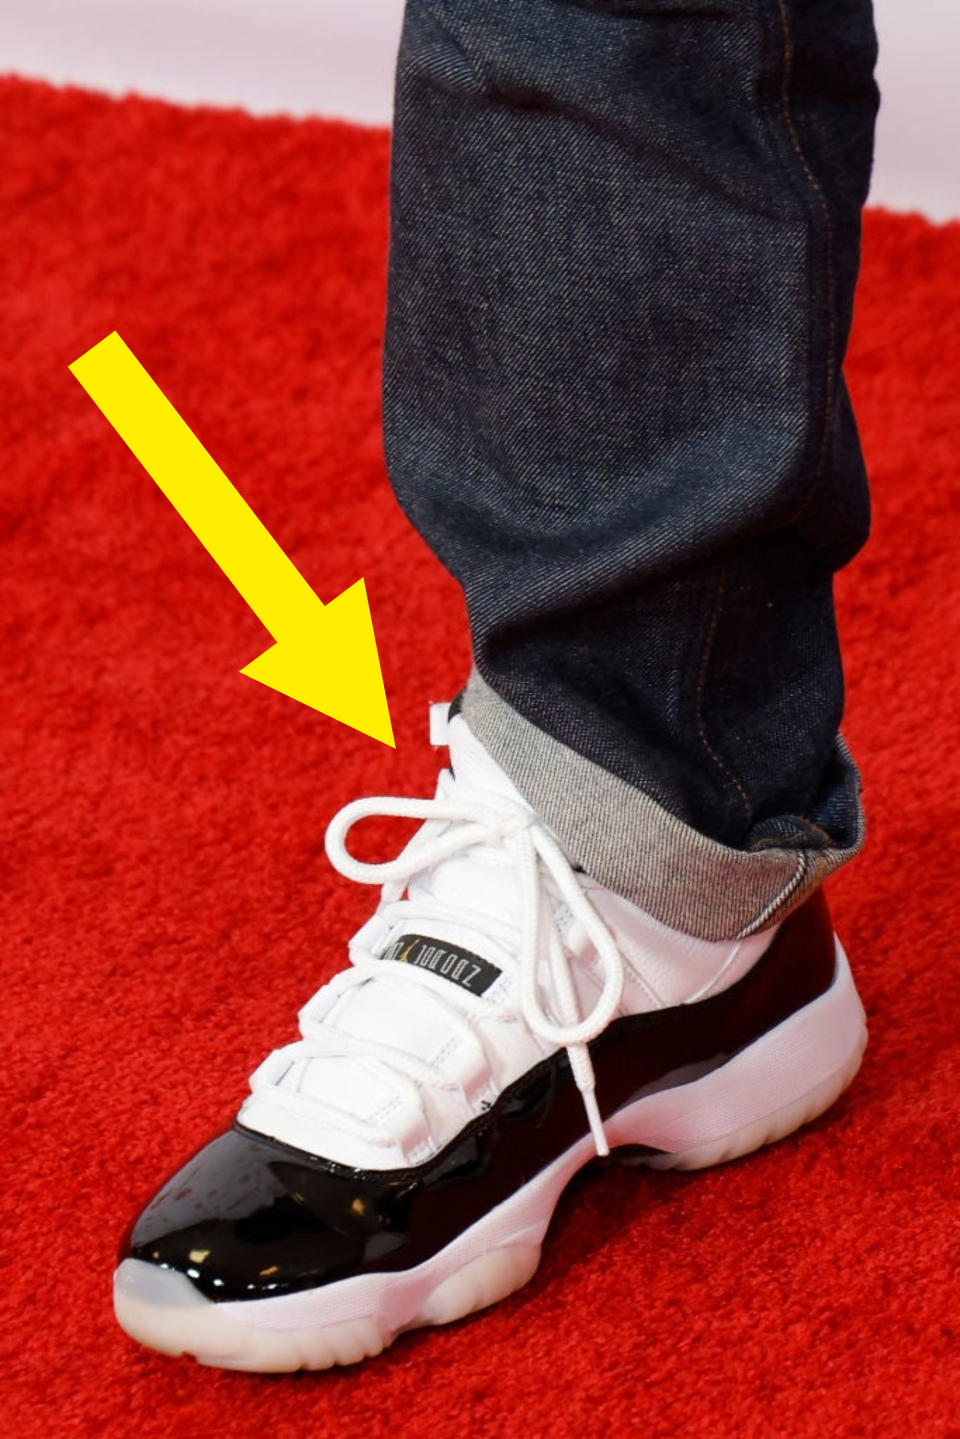 Closeup of Andy Cohen's jeans and shoes